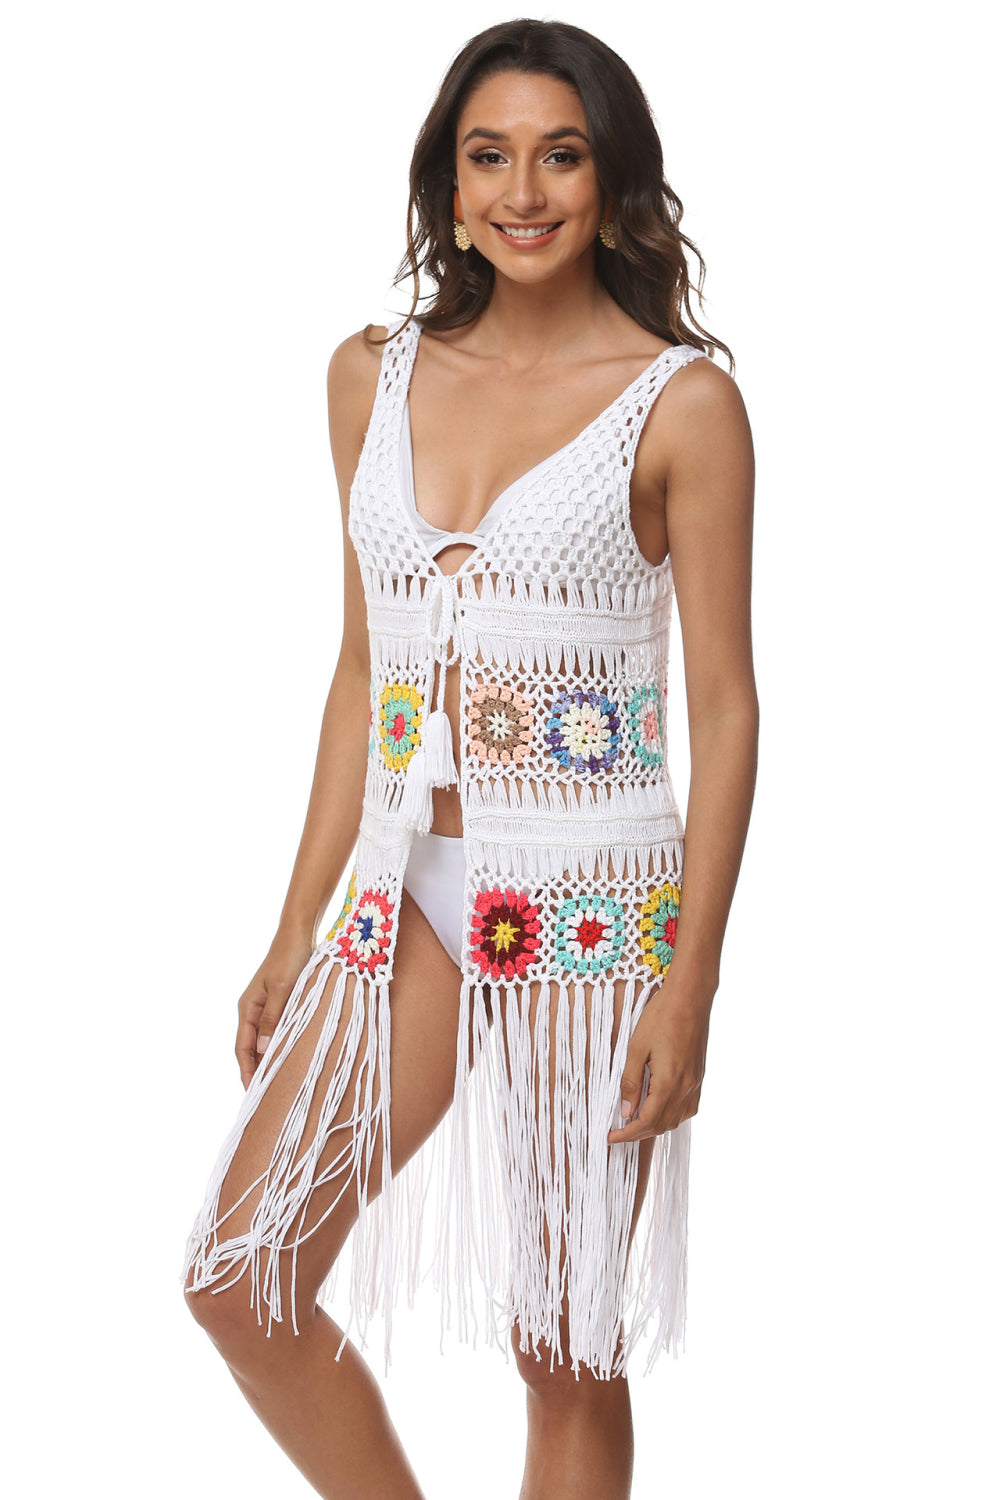 One Size Openwork Fringe Detail Embroidery Sleeveless Cover-Up